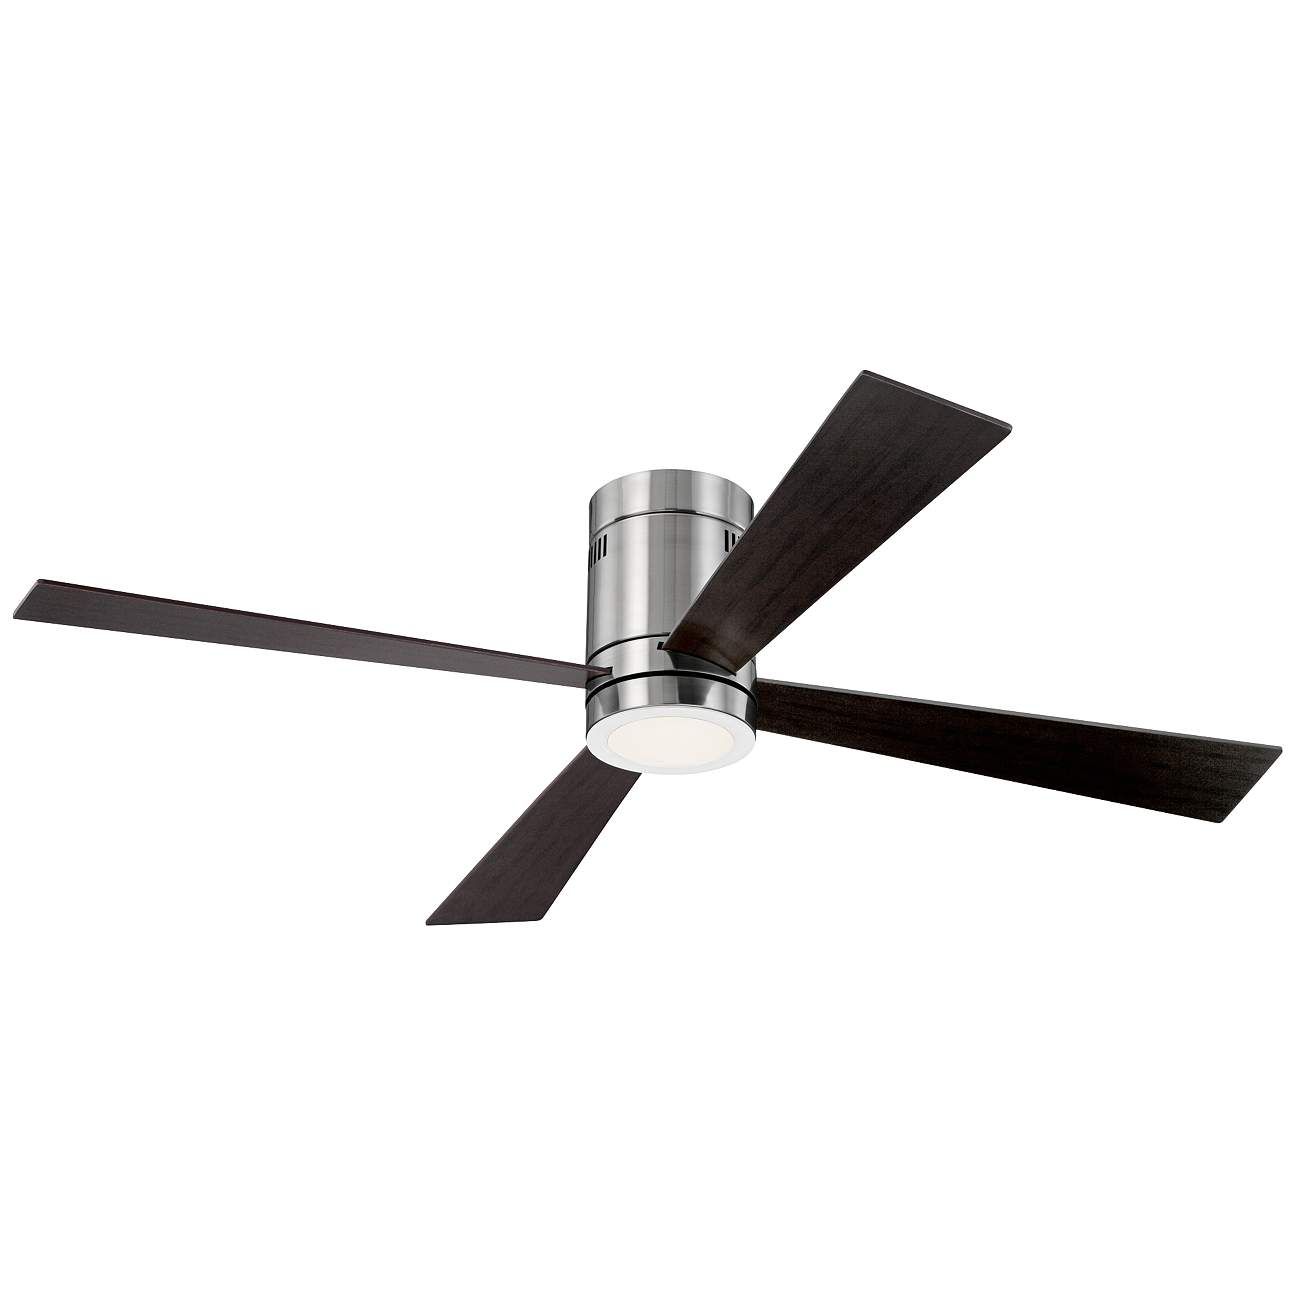 52" Casa Vieja Revue Brushed Nickel LED Hugger Ceiling Fan with Remote | Lamps Plus